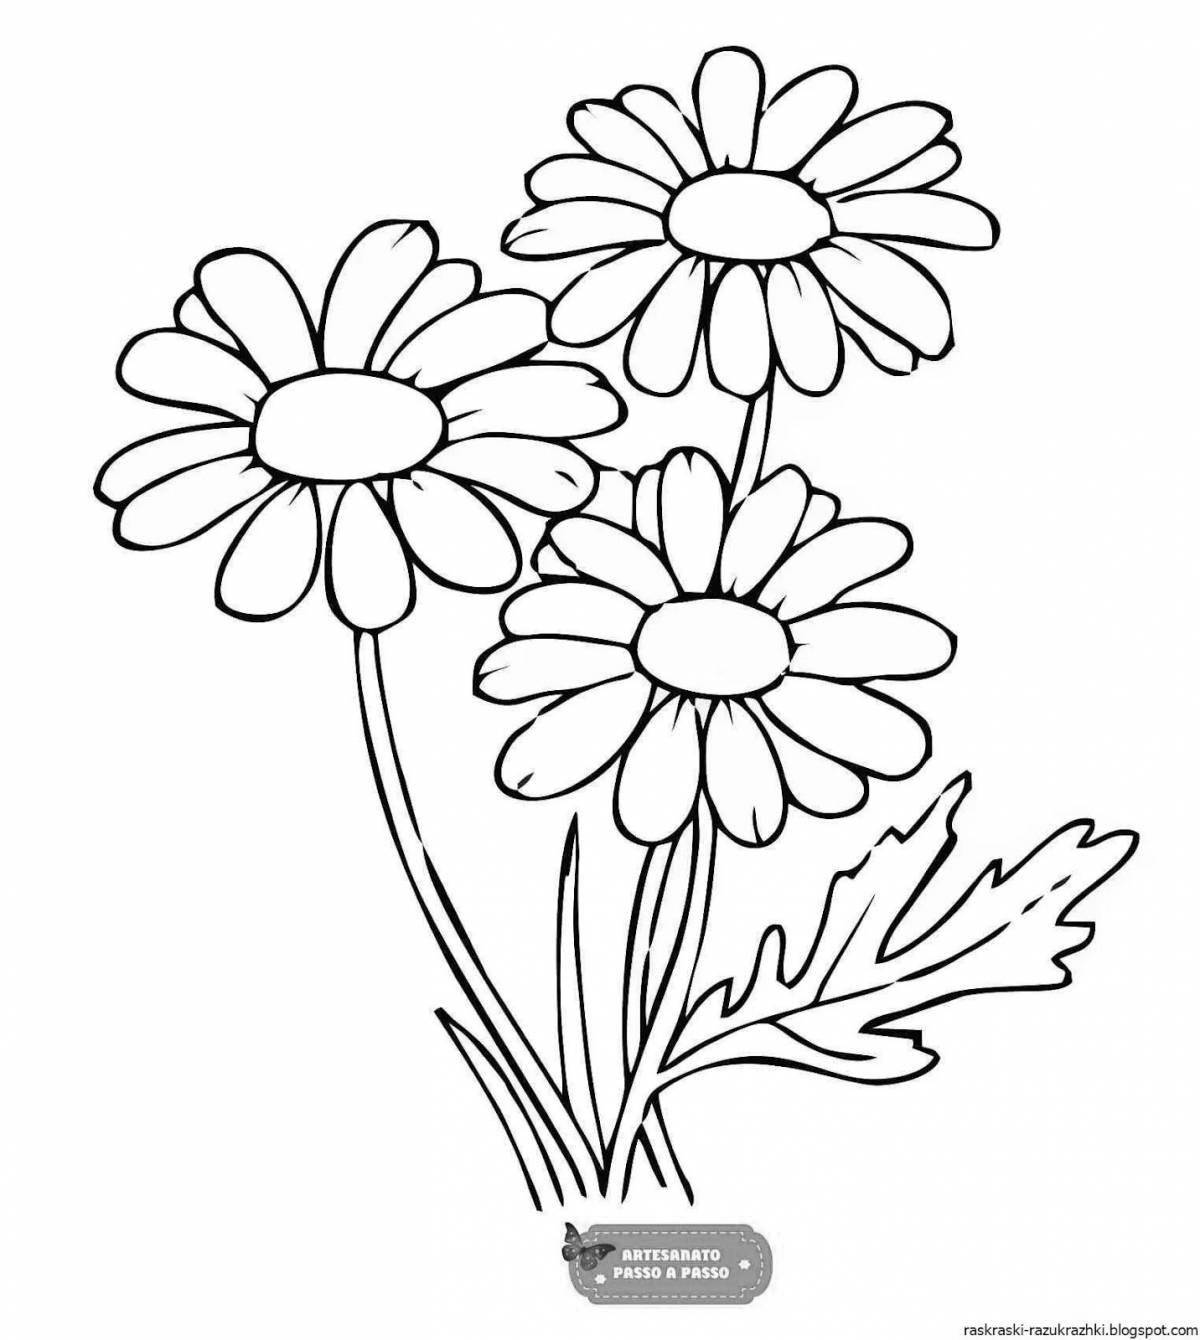 Coloring page fascinating chamomile pattern